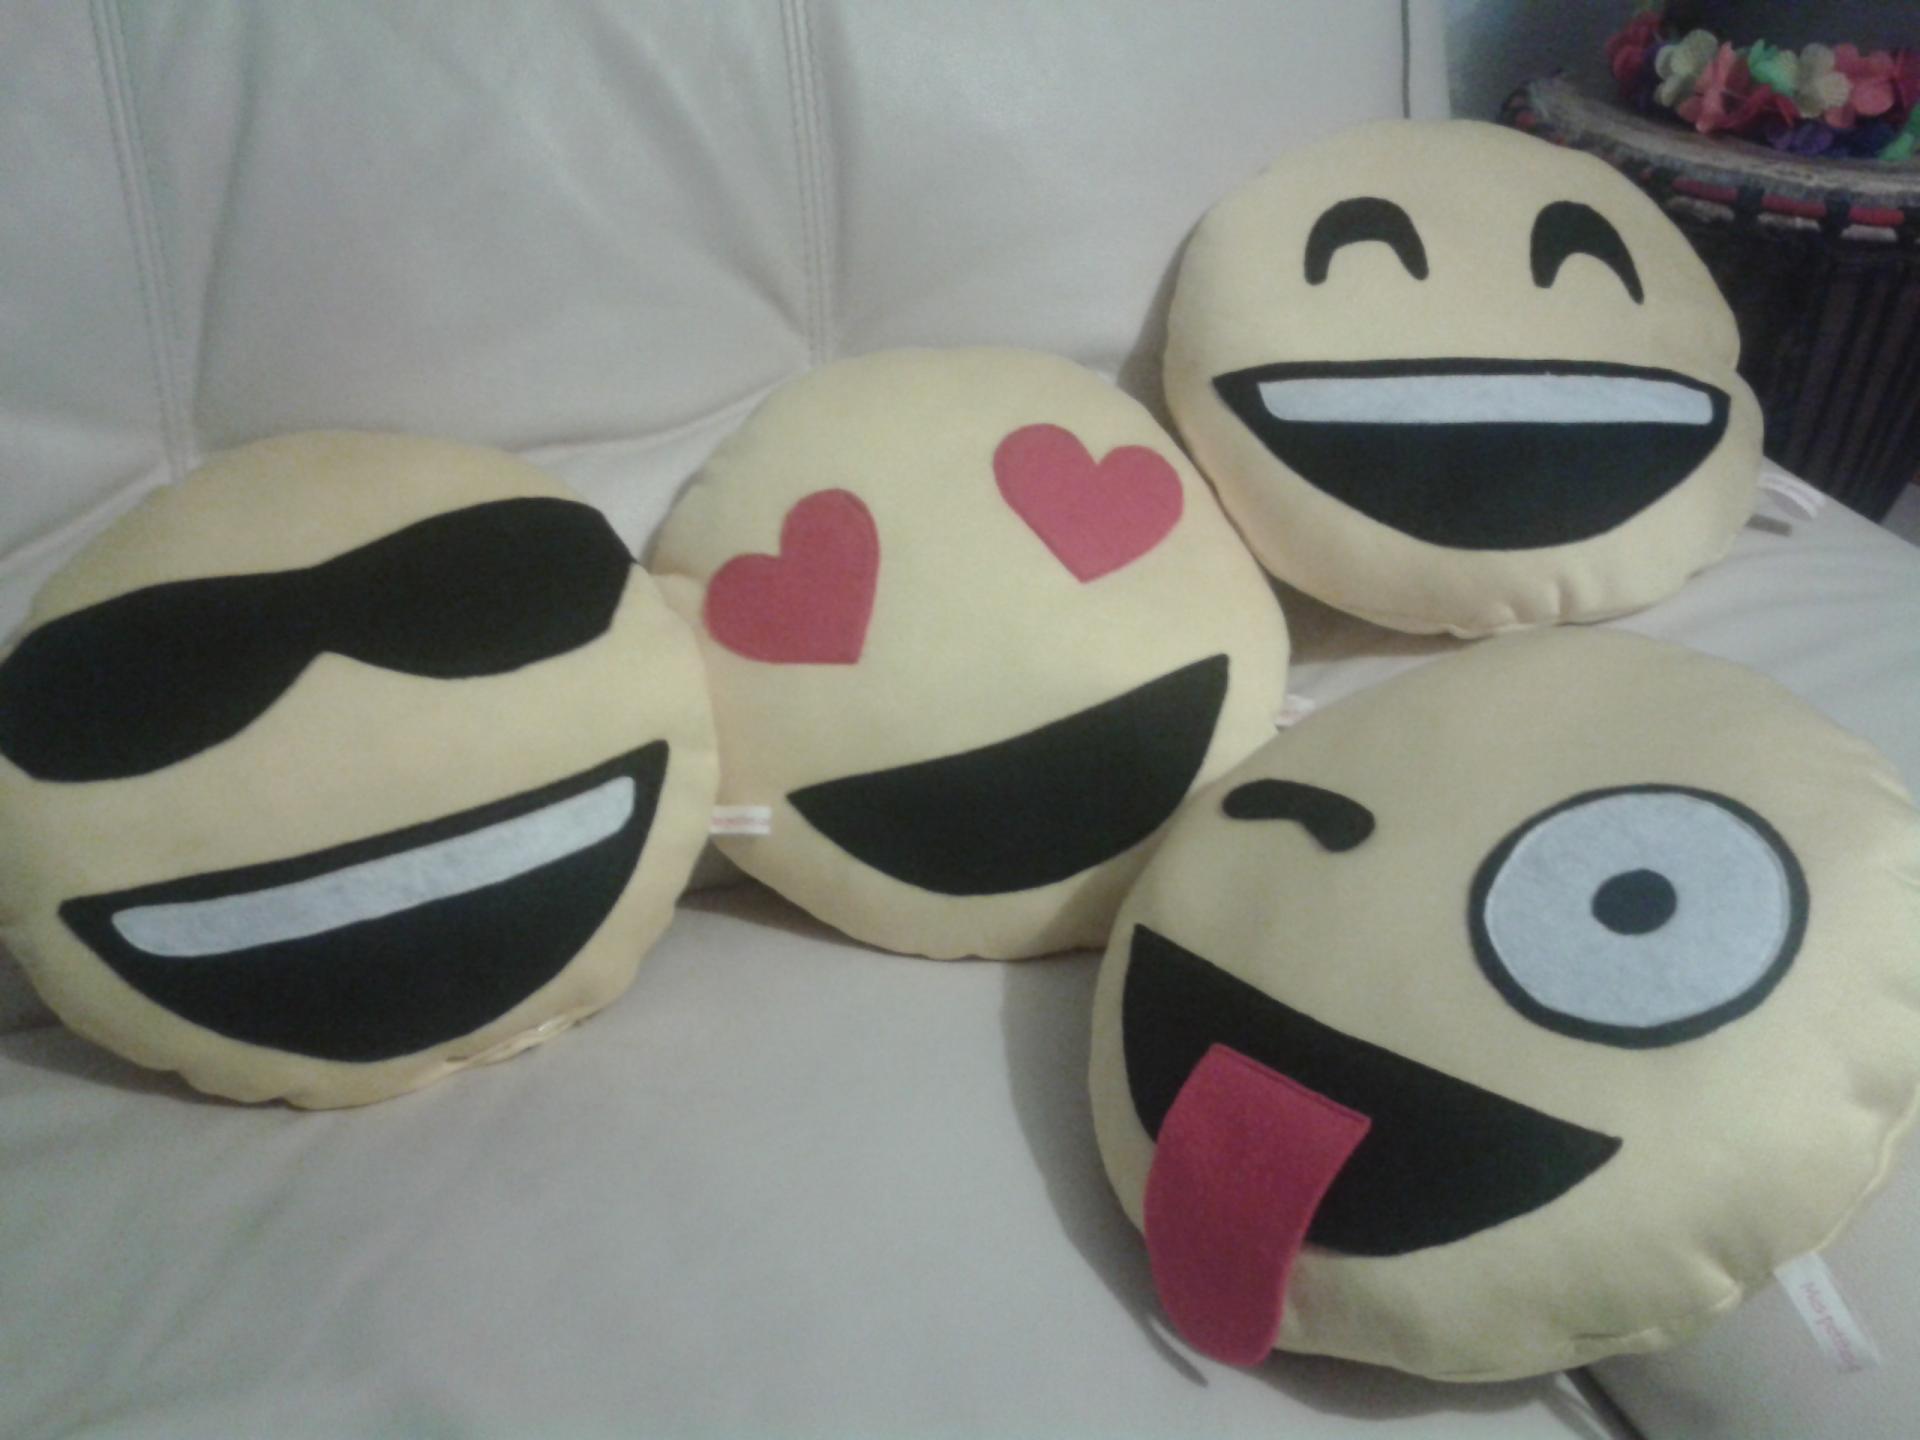 Coussin smiley